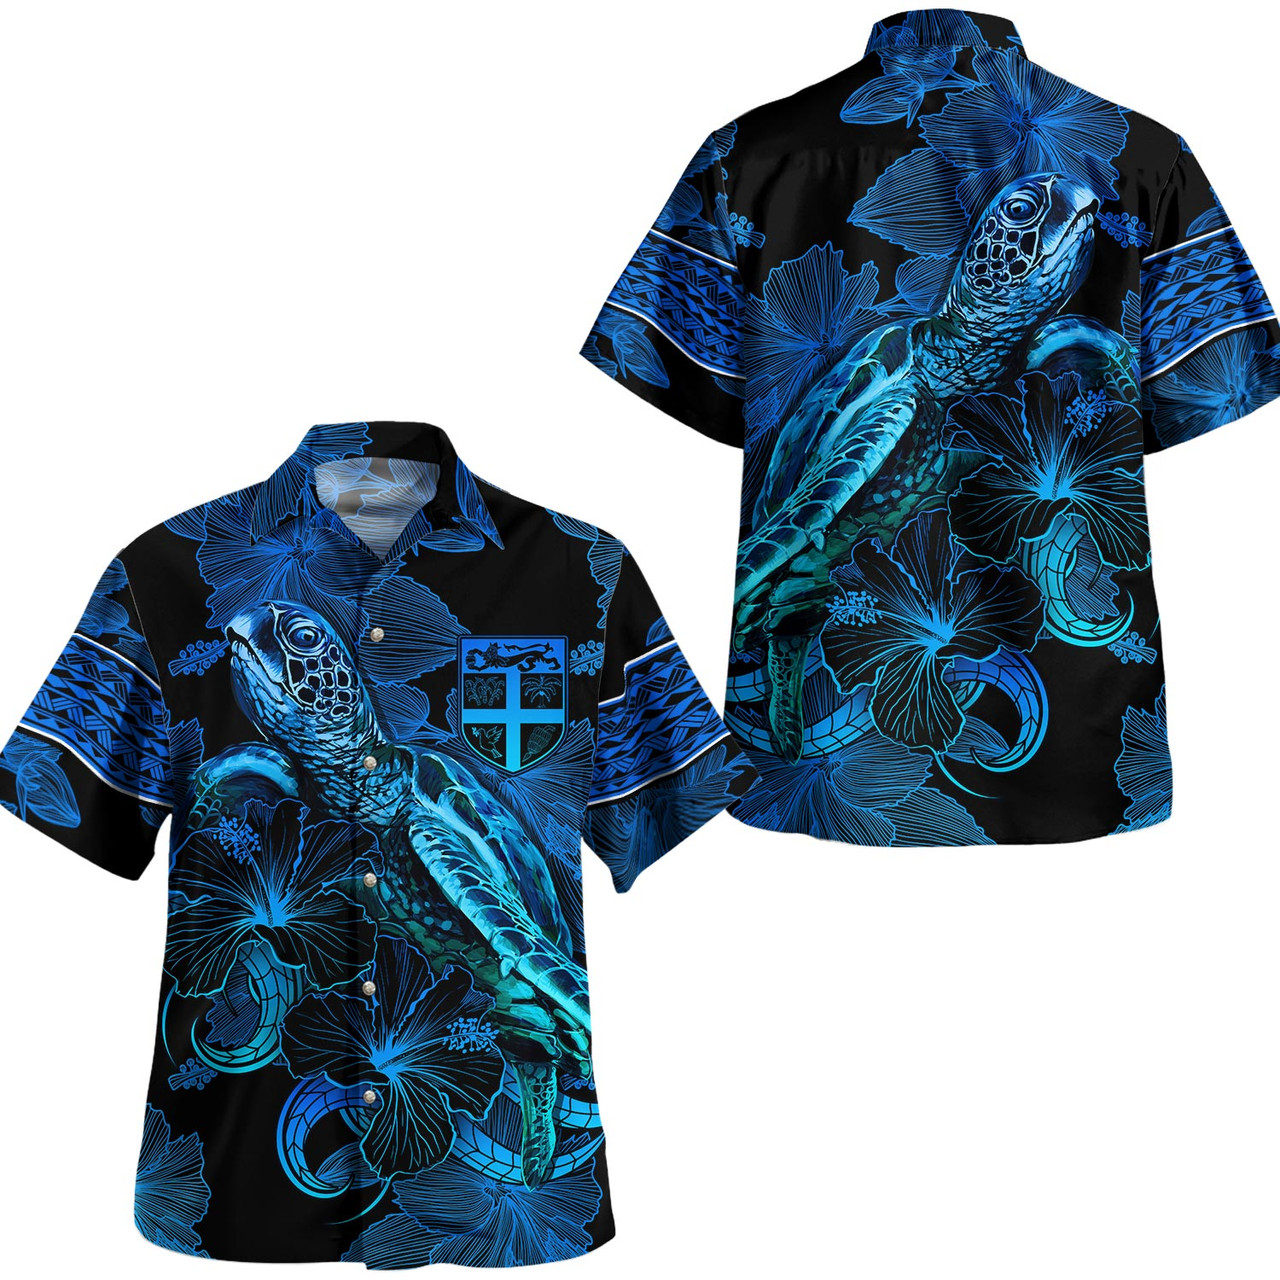 Fiji Combo Puletasi And Shirt Sea Turtle With Blooming Hibiscus Flowers Tribal Blue